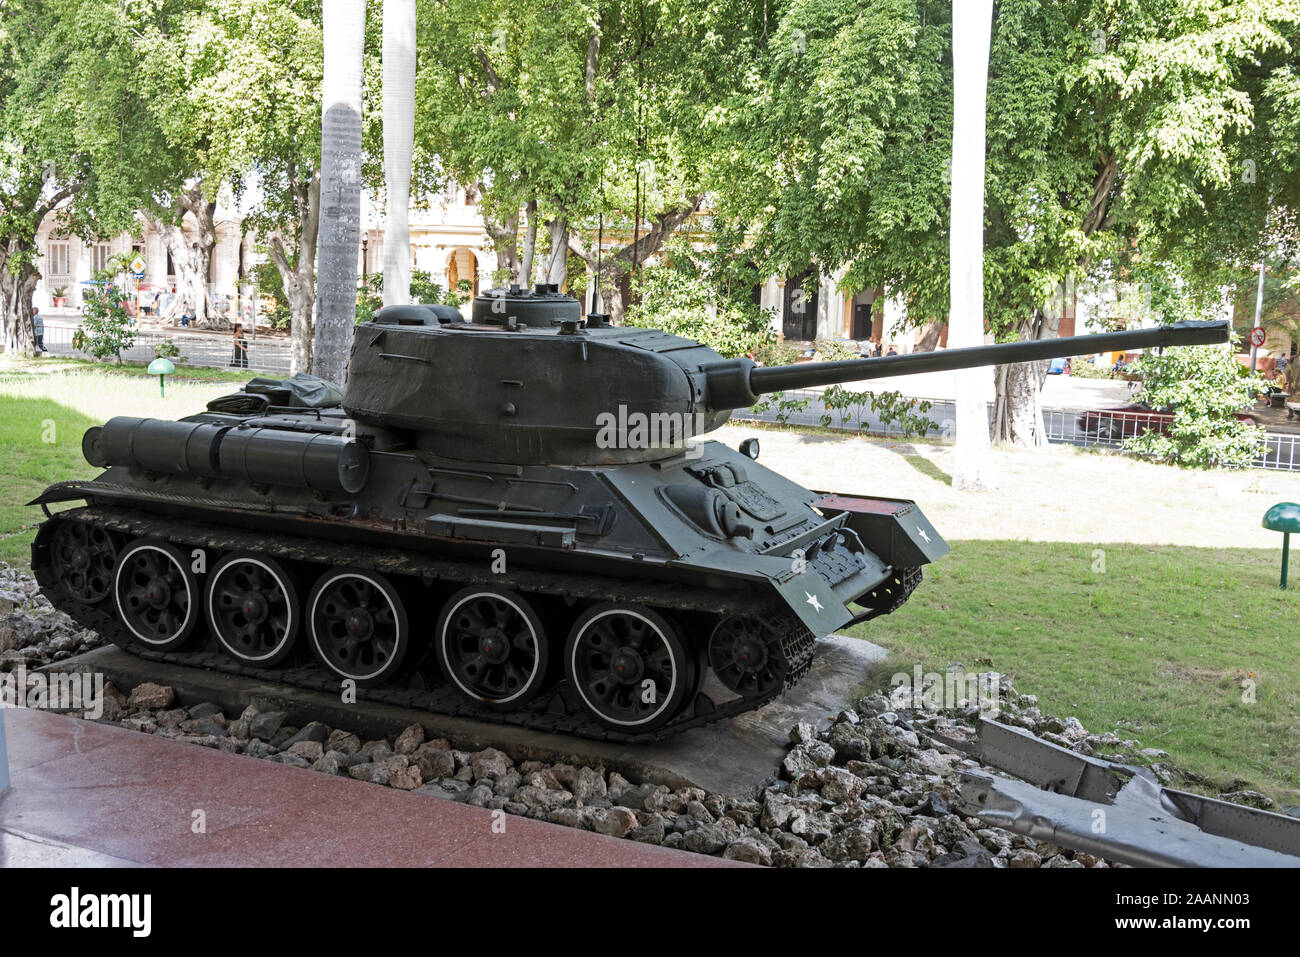 The Russian-built Tank T-34 was used by Fidel Castro during the battle of the Bay of Pigs in Cuba in 1961.   His tank badly damaged the American troop Stock Photo